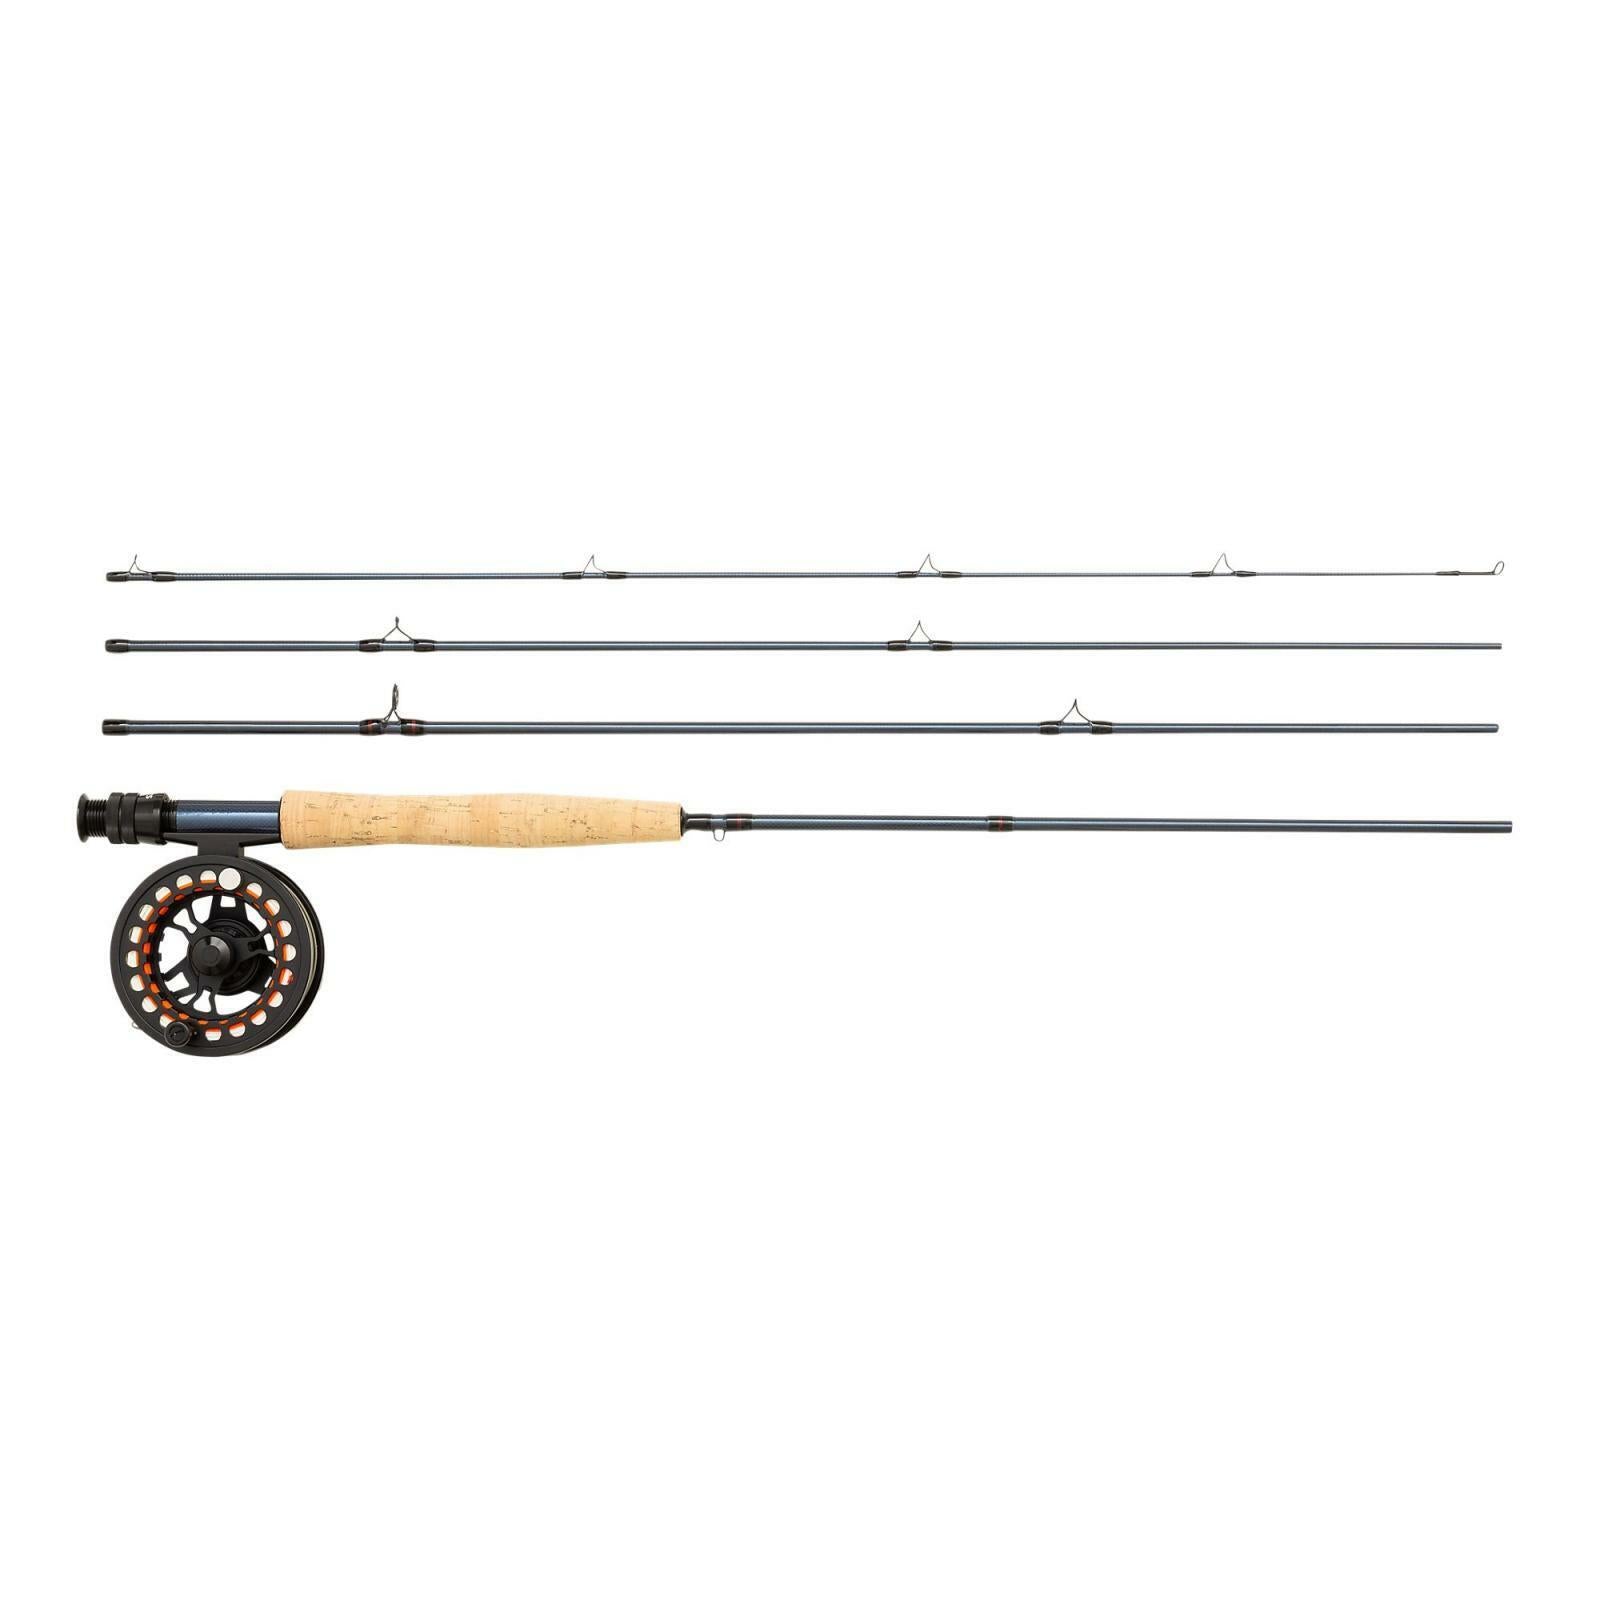 Greys K4ST X Fly Fishing Rod Combo With Reel Line & Travel Tube